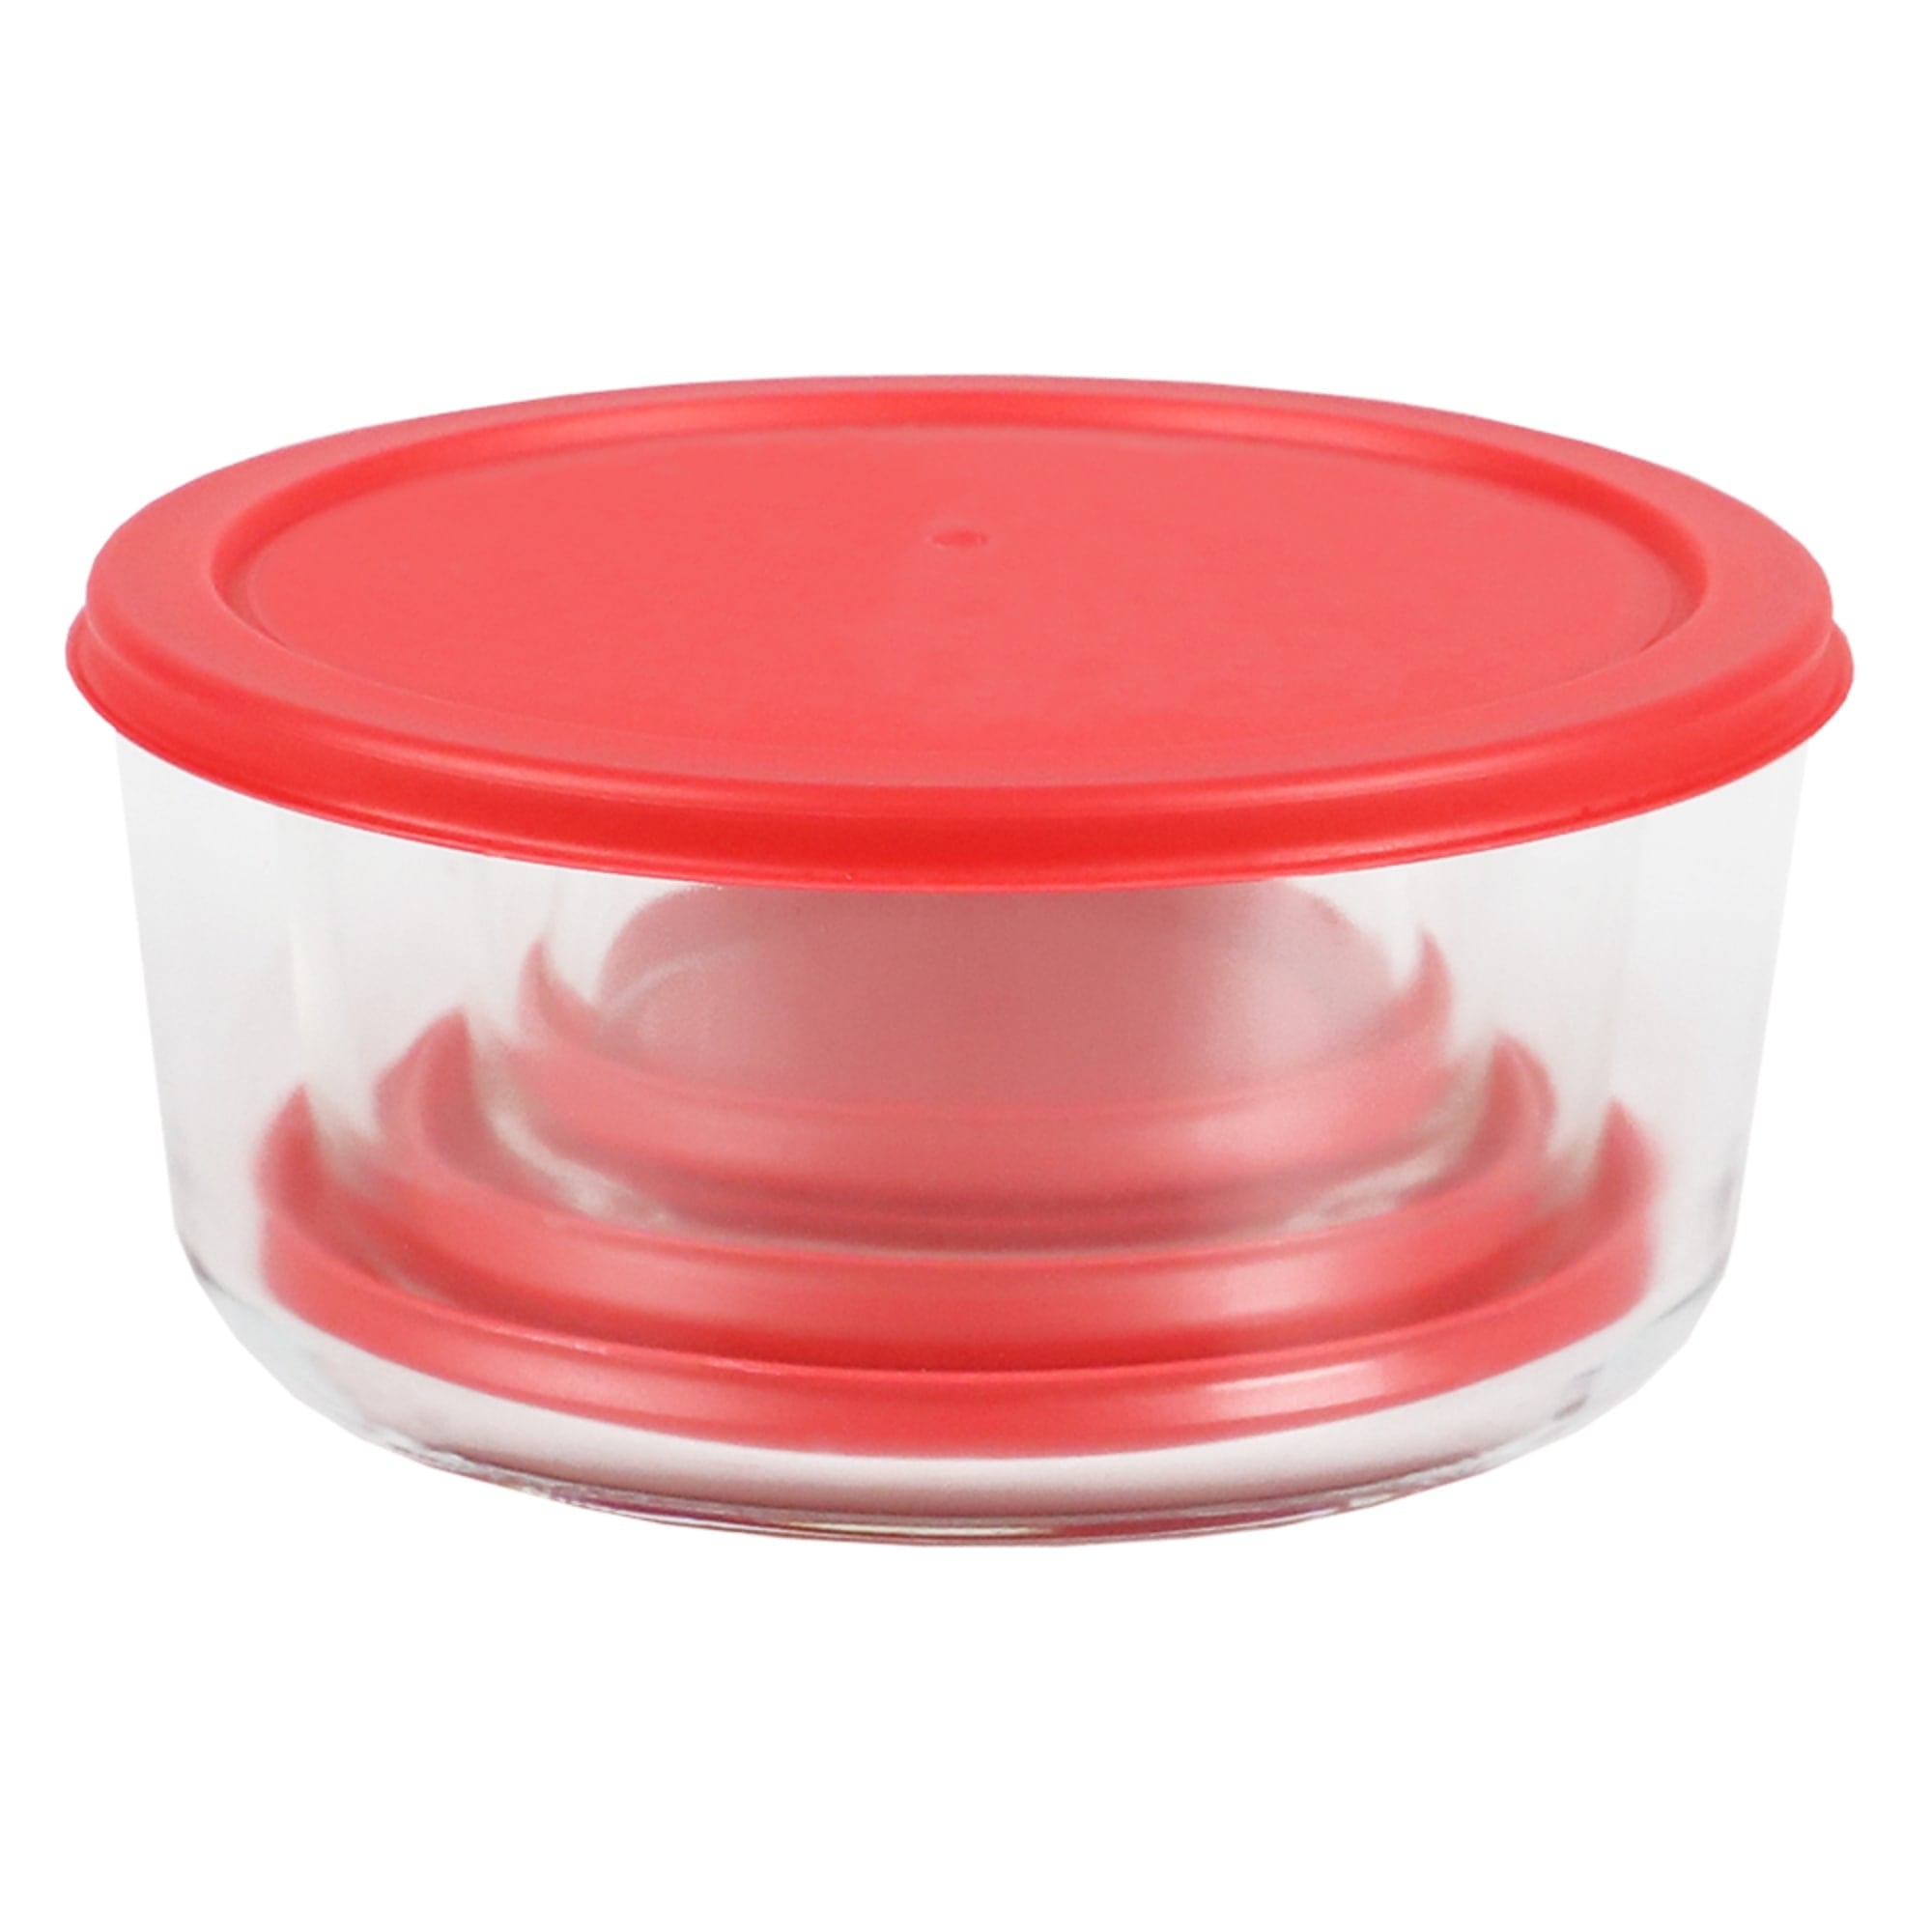 Home Basics Round 8 oz. Borosilicate Glass Food Storage Container with Red Lid $2.00 EACH, CASE PACK OF 12